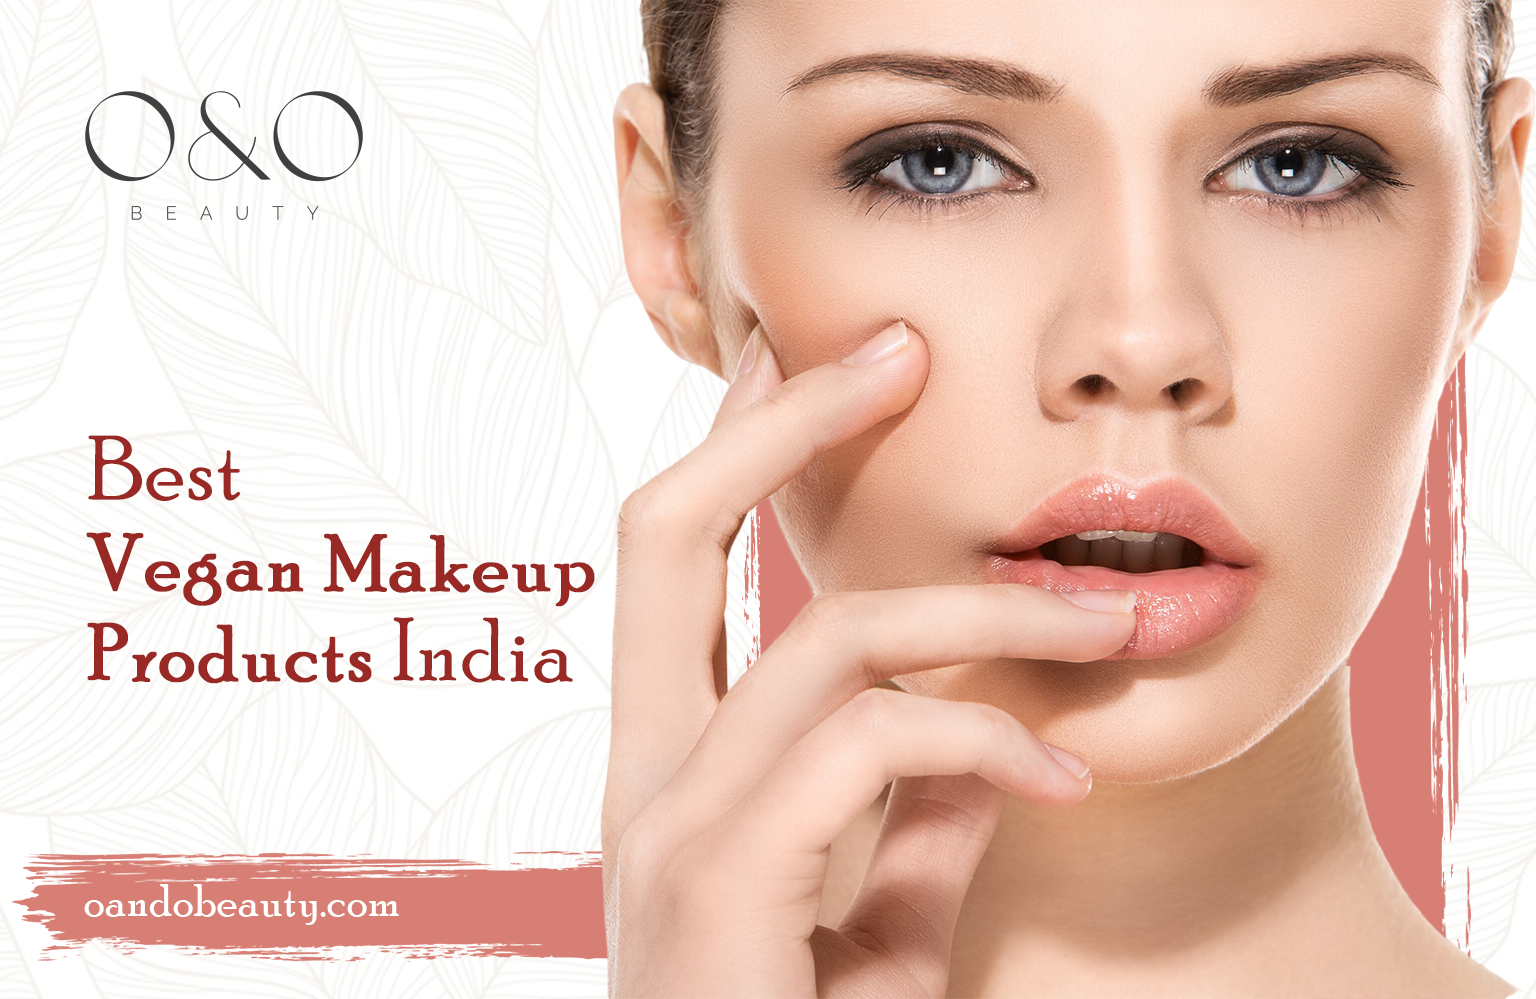 Buy The Best Vegan Makeup Products in India | O&O Beauty